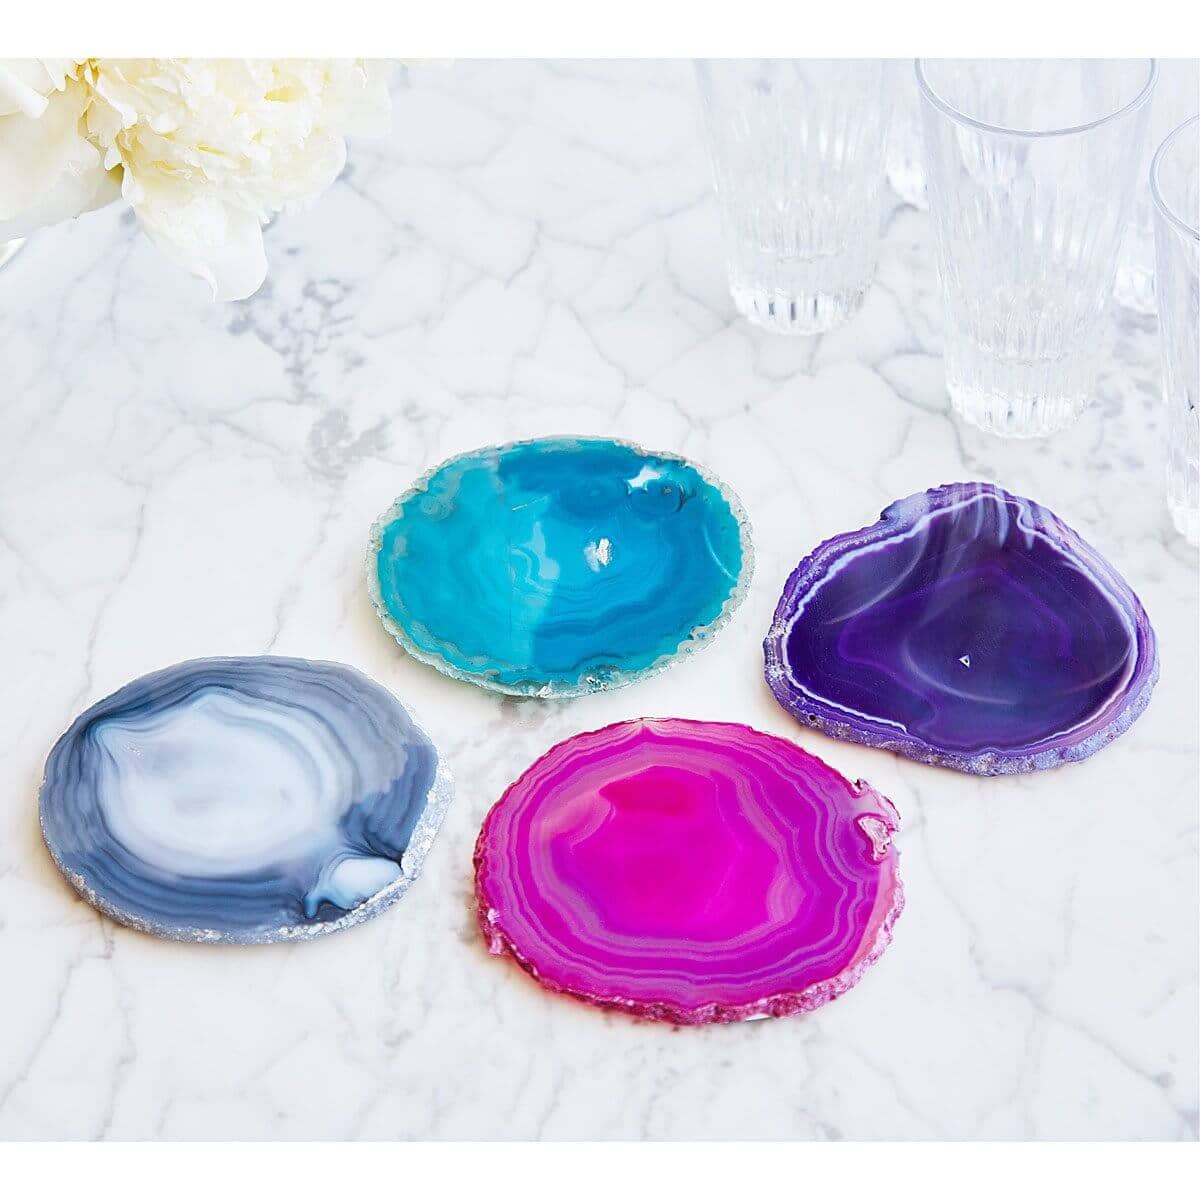 Give Jewel Toned Coasters From Brazil